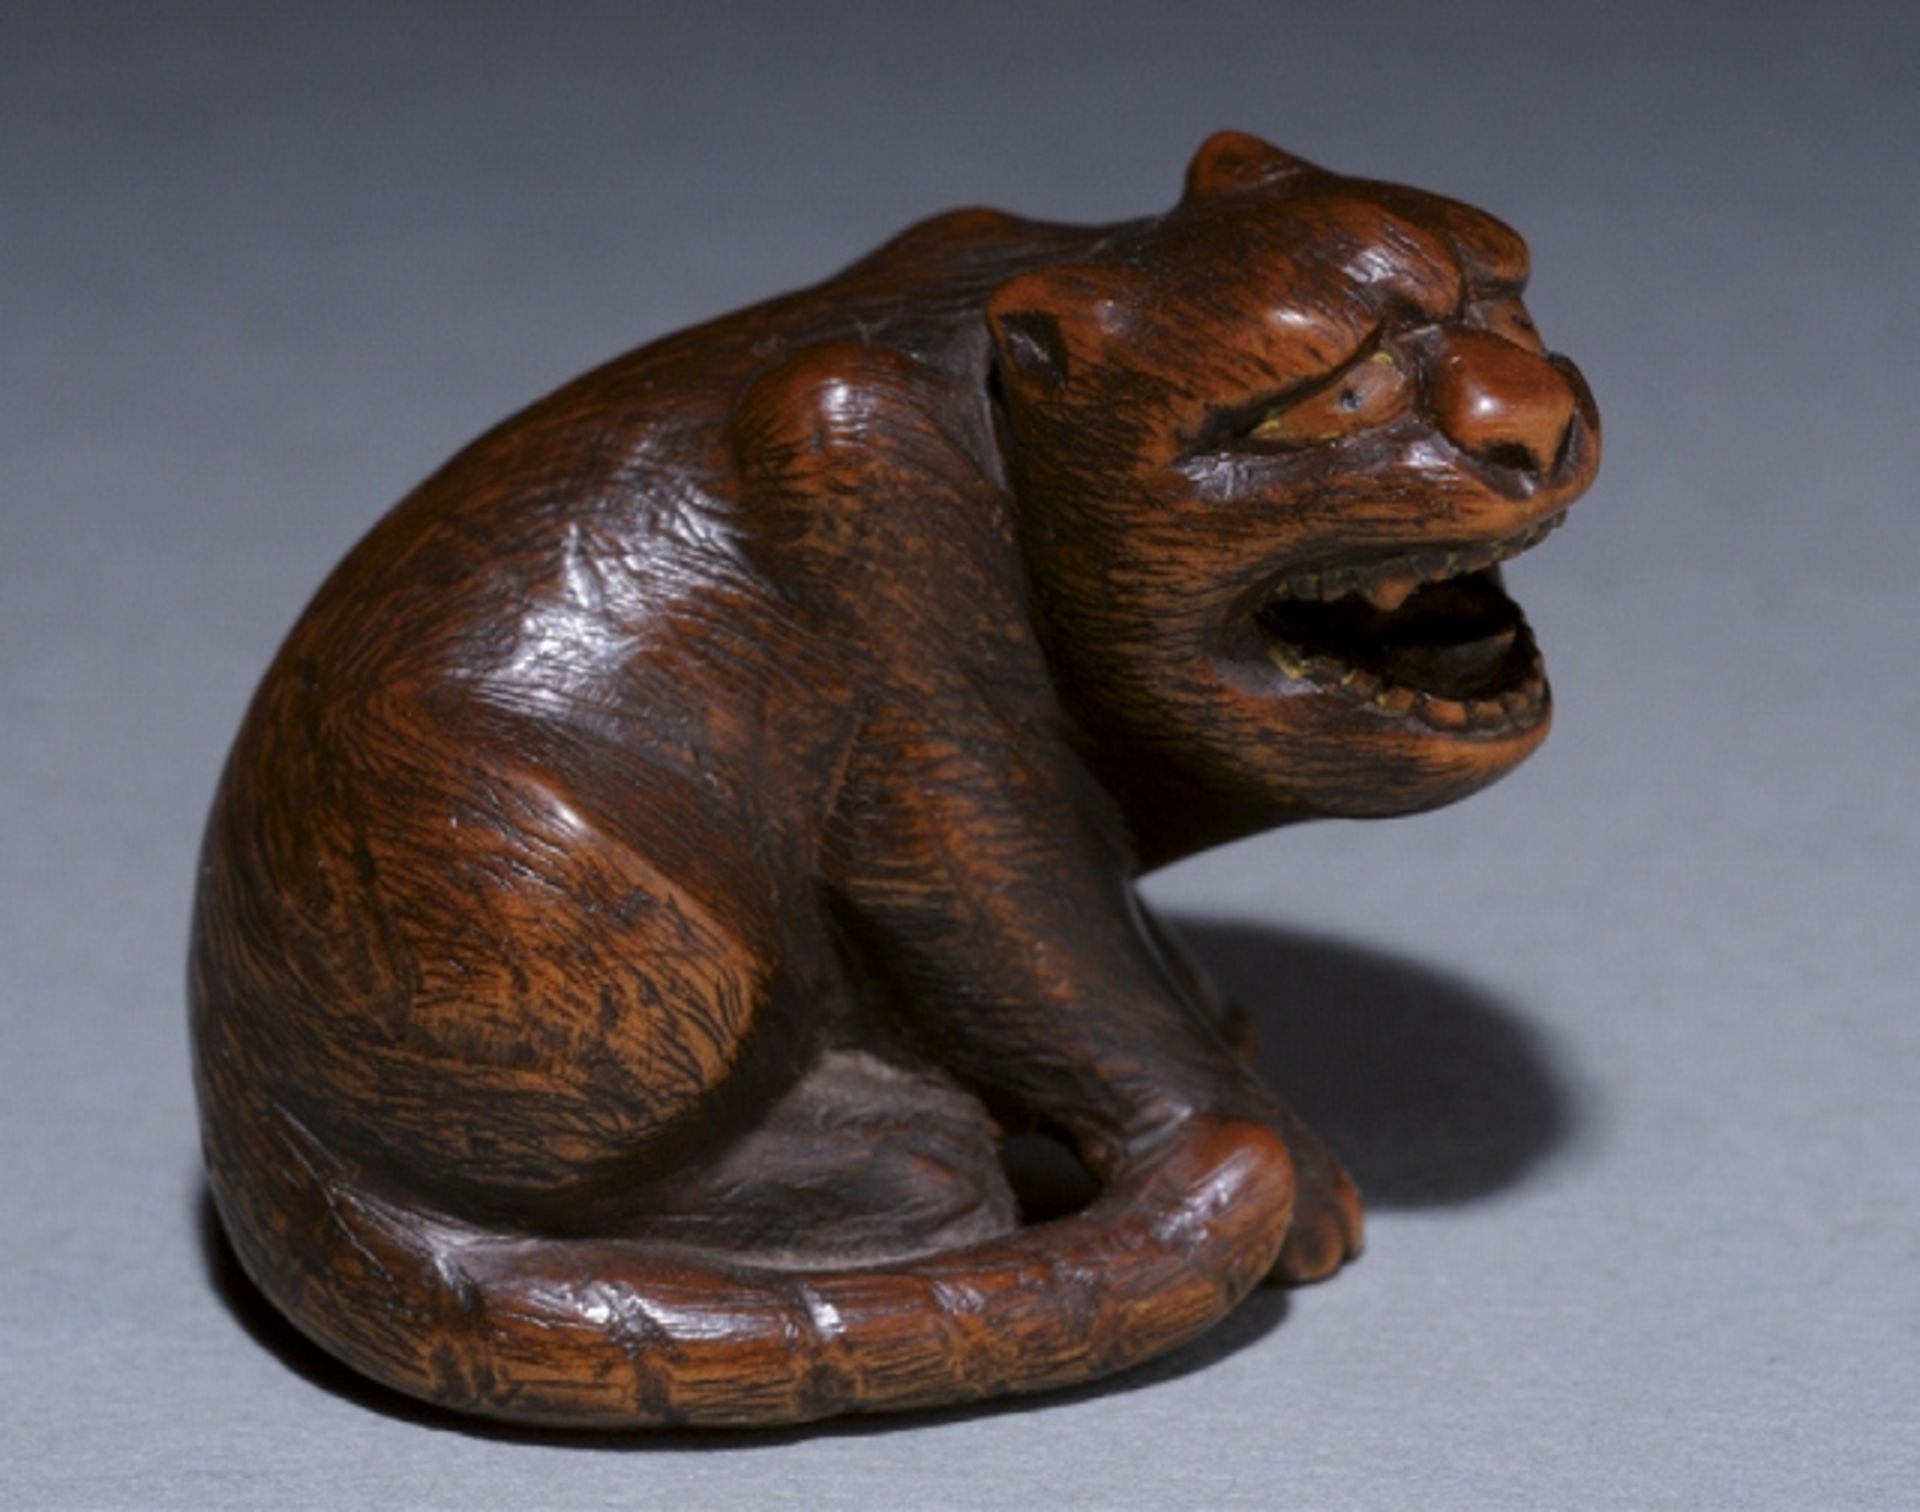 SHIGENAO: TIGER  Netsuke, Wood. Japan, 19th cent.  The head of the tiger is large with an almost